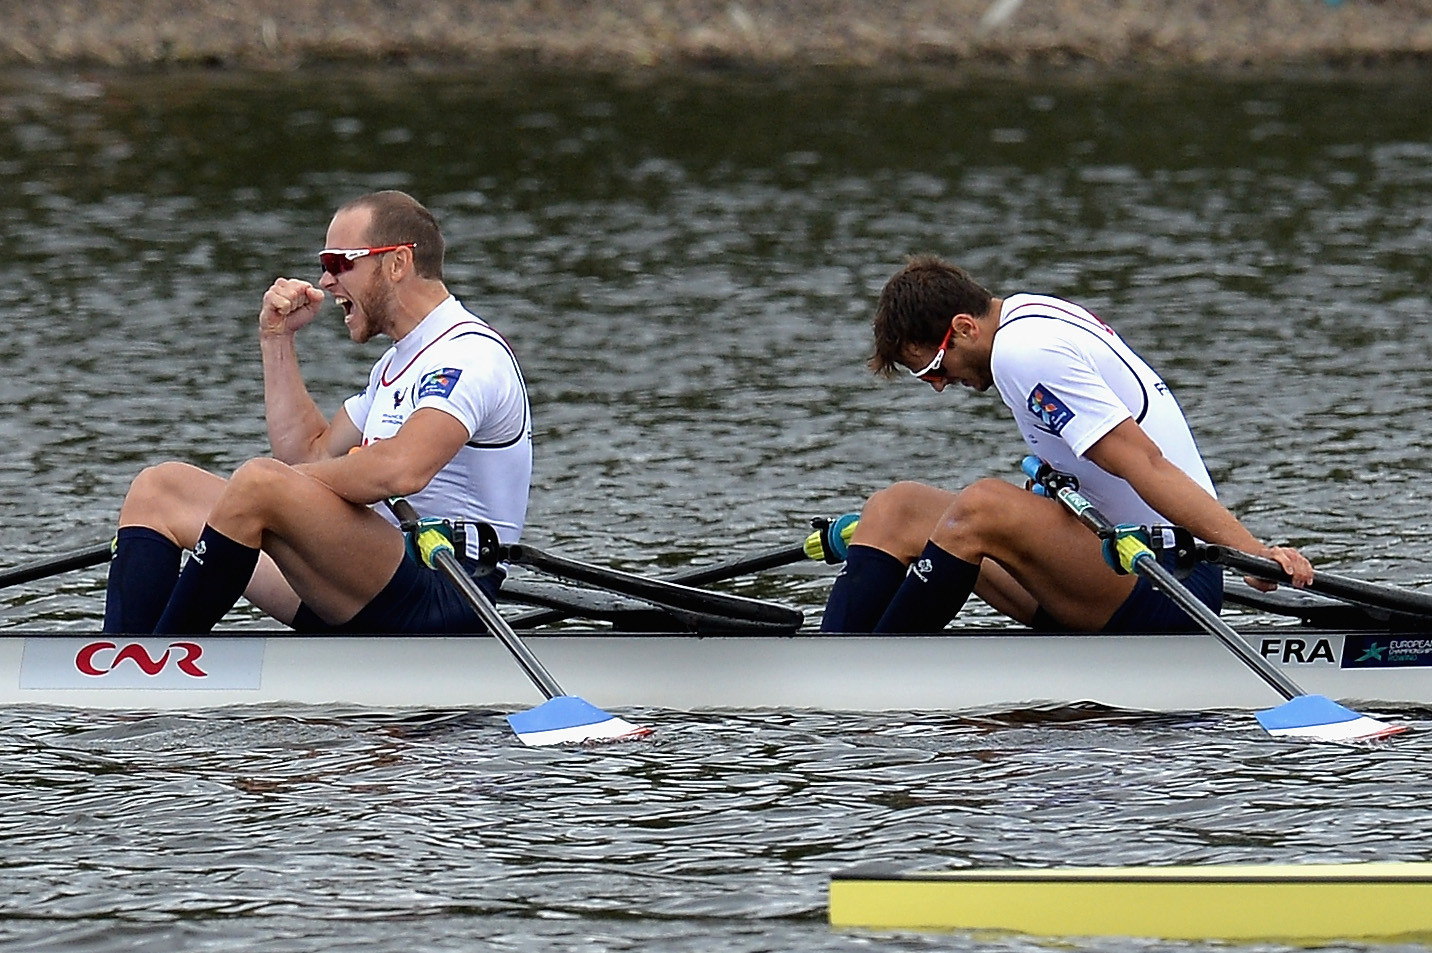 Matthieu Androdias, left, and Hugo Boucheron, right, won the men's double sculls event ©Getty Images